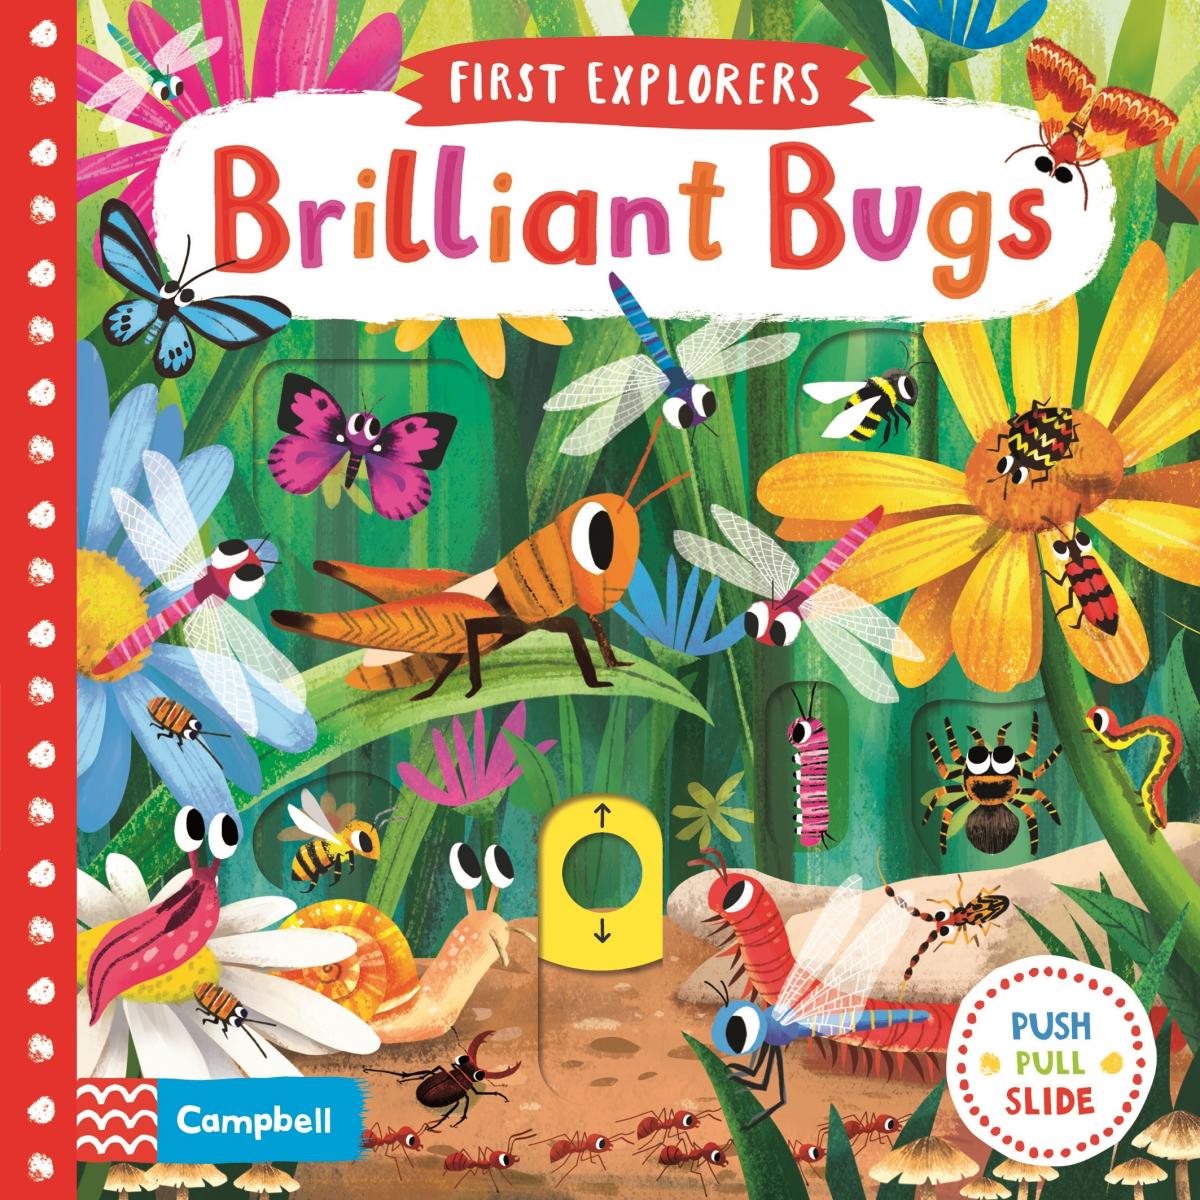 Книга Bugs. Обложка Bugs. Chorkung "Brilliant Bugs". First Explorers: in the Jungle.